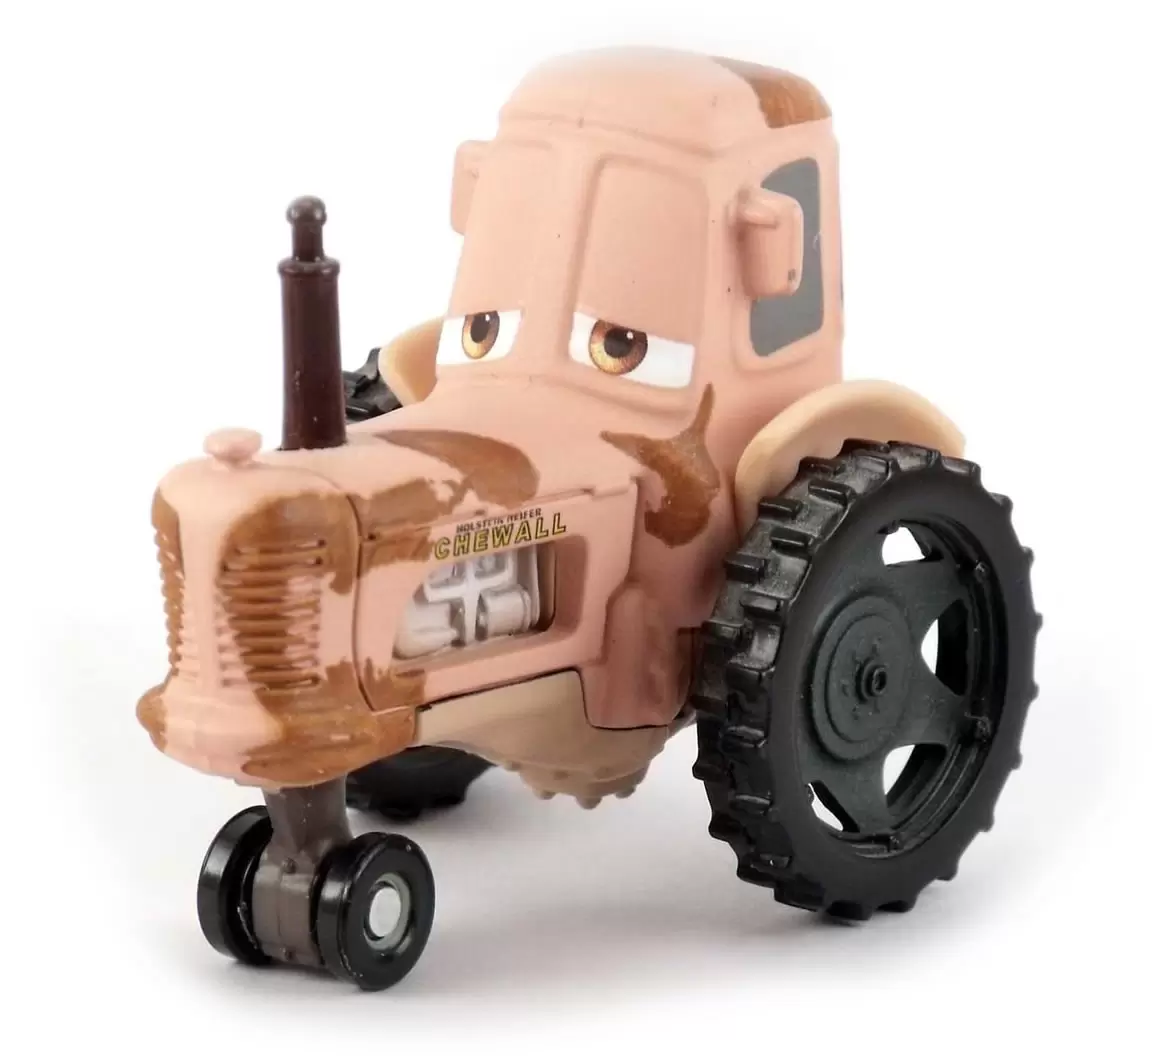 Cars 1 - Tractor